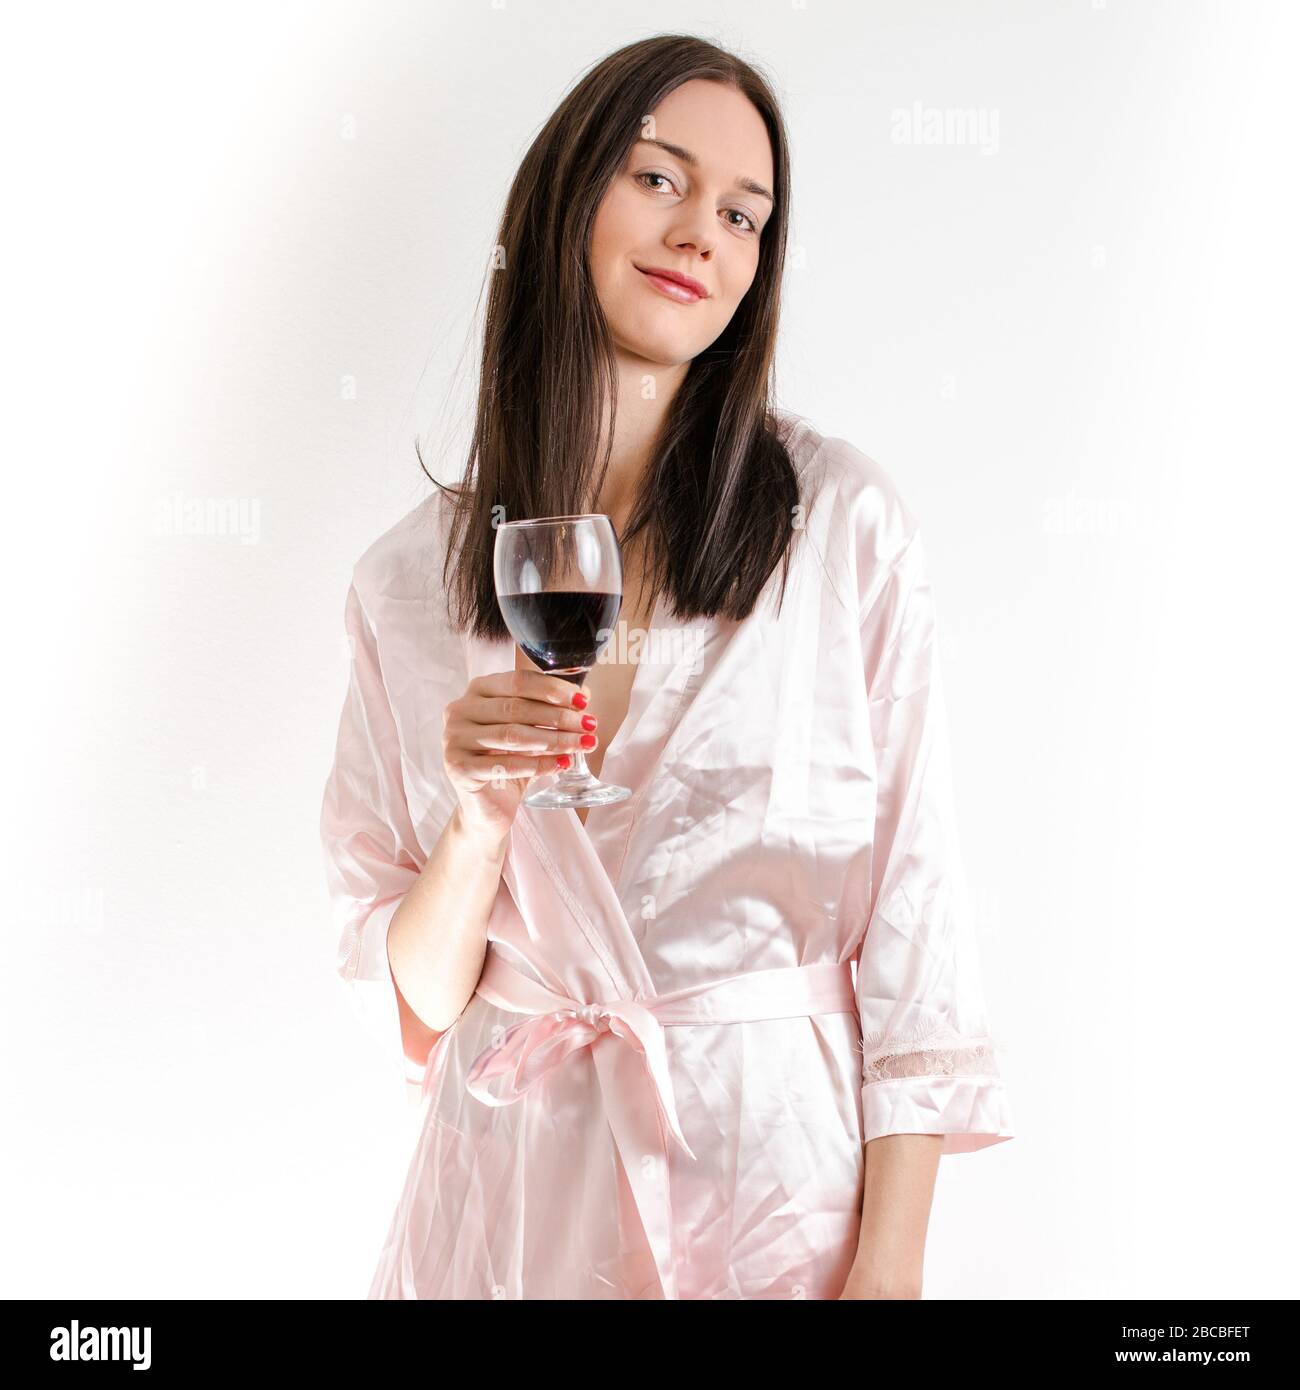 Attractive young brunette woman wearing a pink nightgown, holding a class of red wine smiling. Royalty free stock photo. Stock Photo